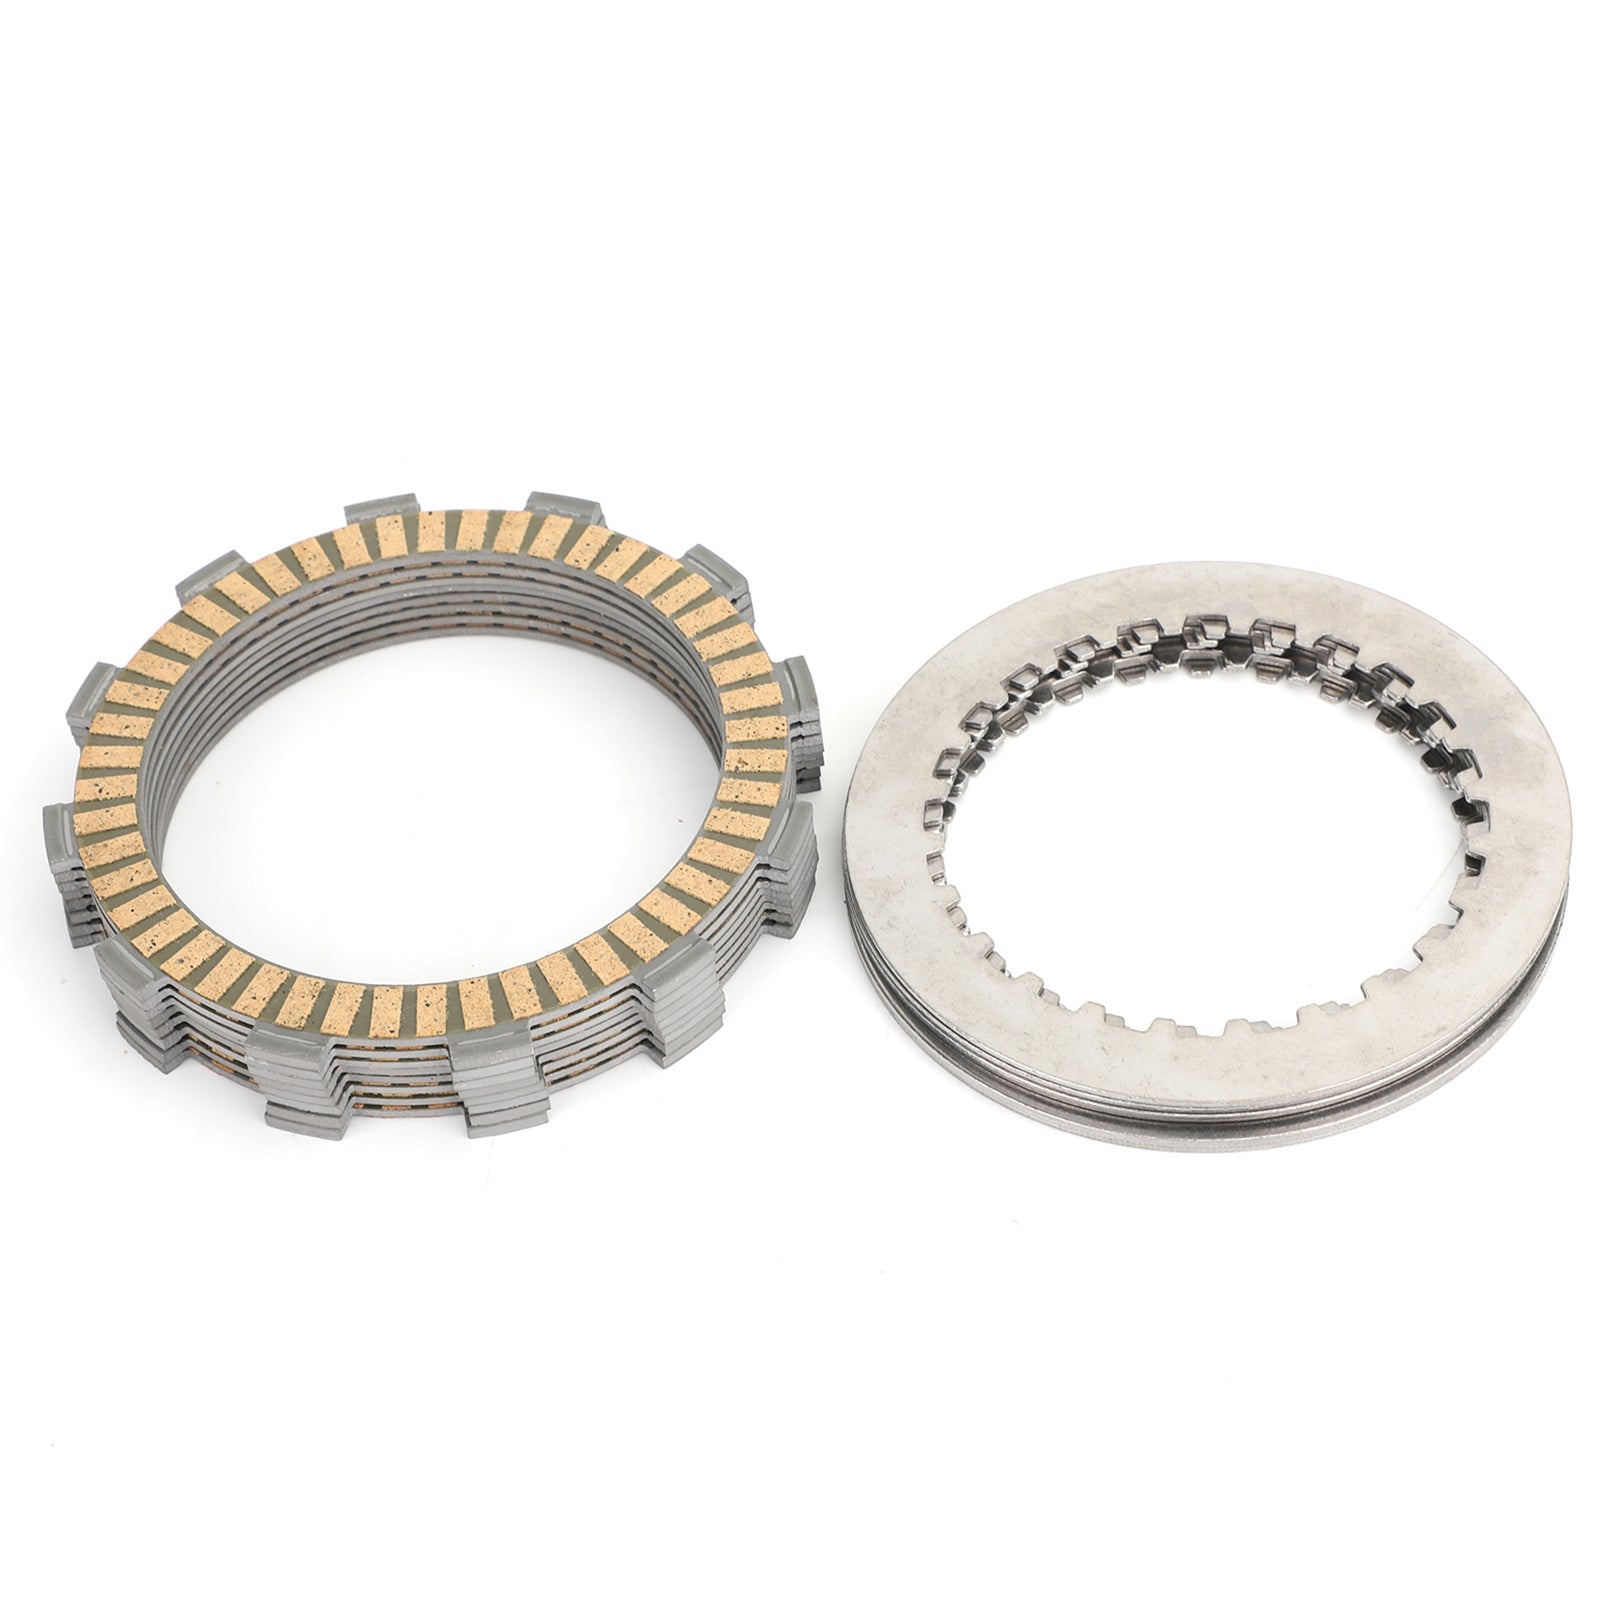 Clutch Kit Steel & Friction Plates for Honda CR 125 R CRF 250 R 2000-2010